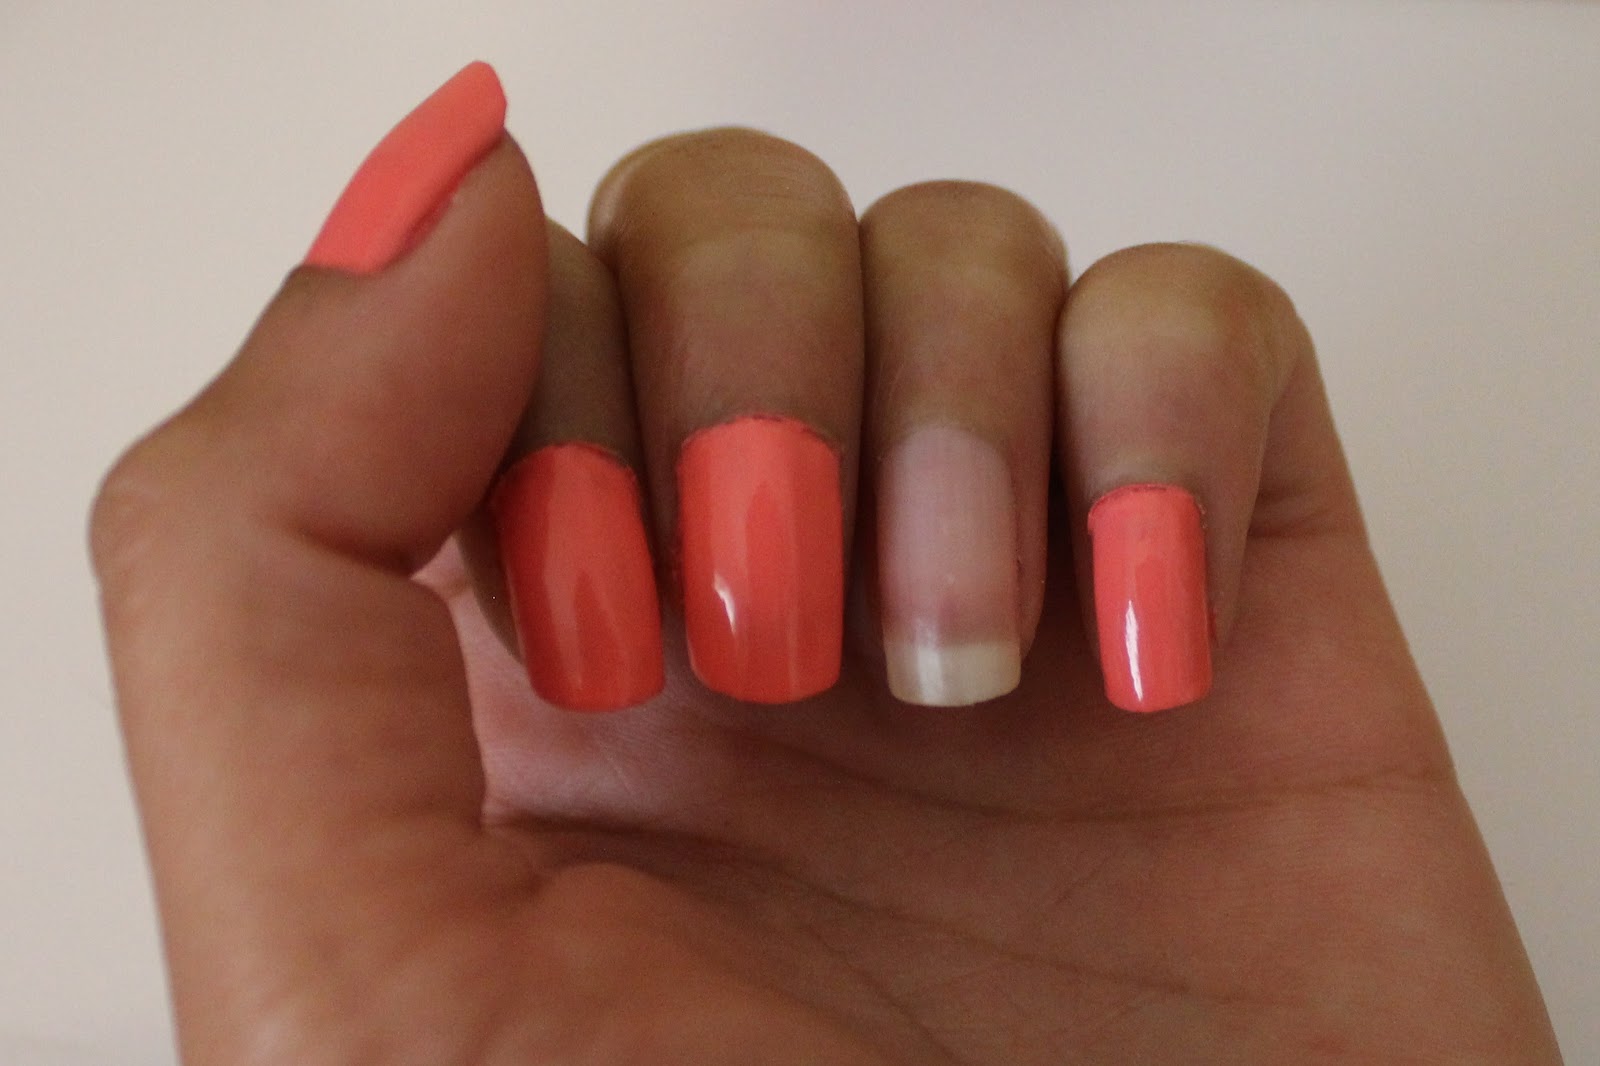 7. Butter London Nail Lacquer in "Trout Pout" - wide 3